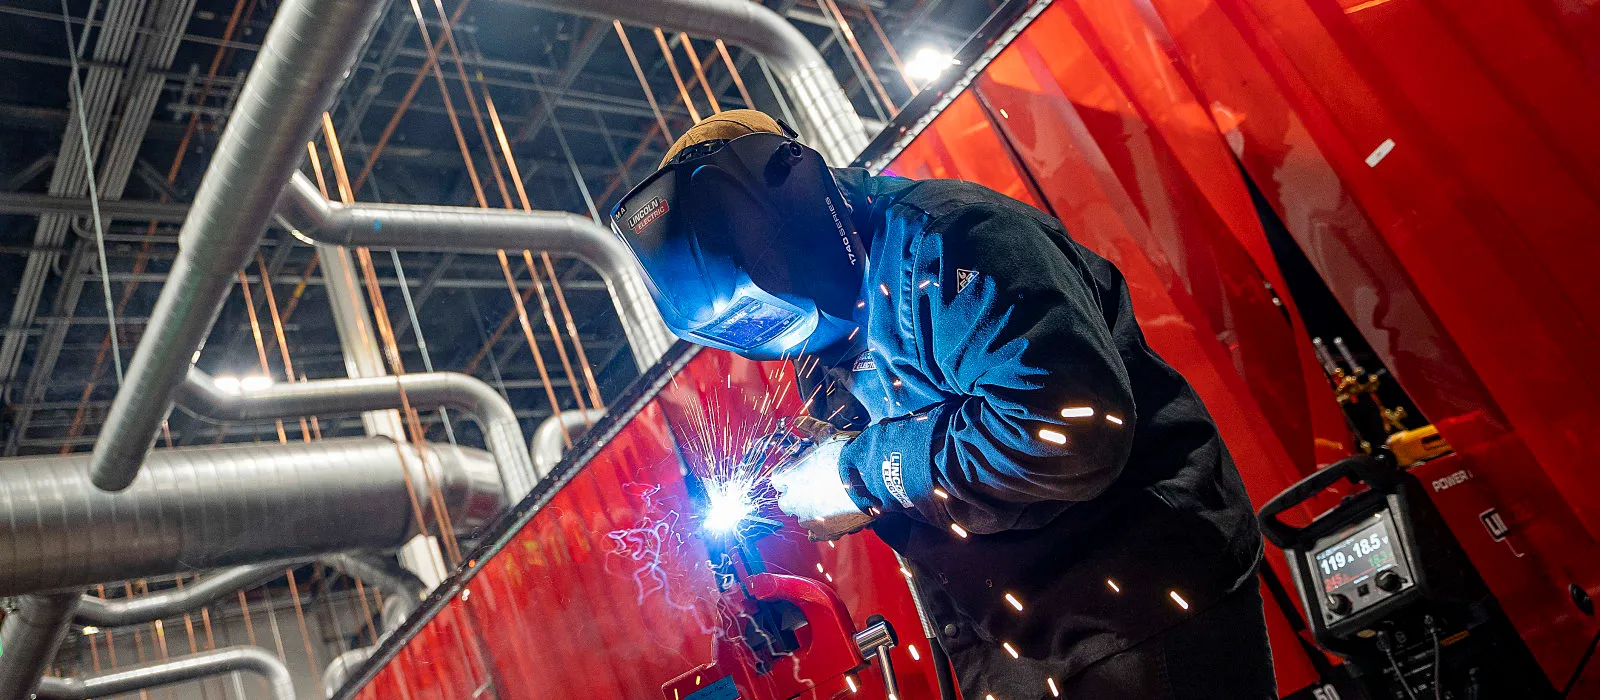 Craft a Career in Welding With Help From UTI